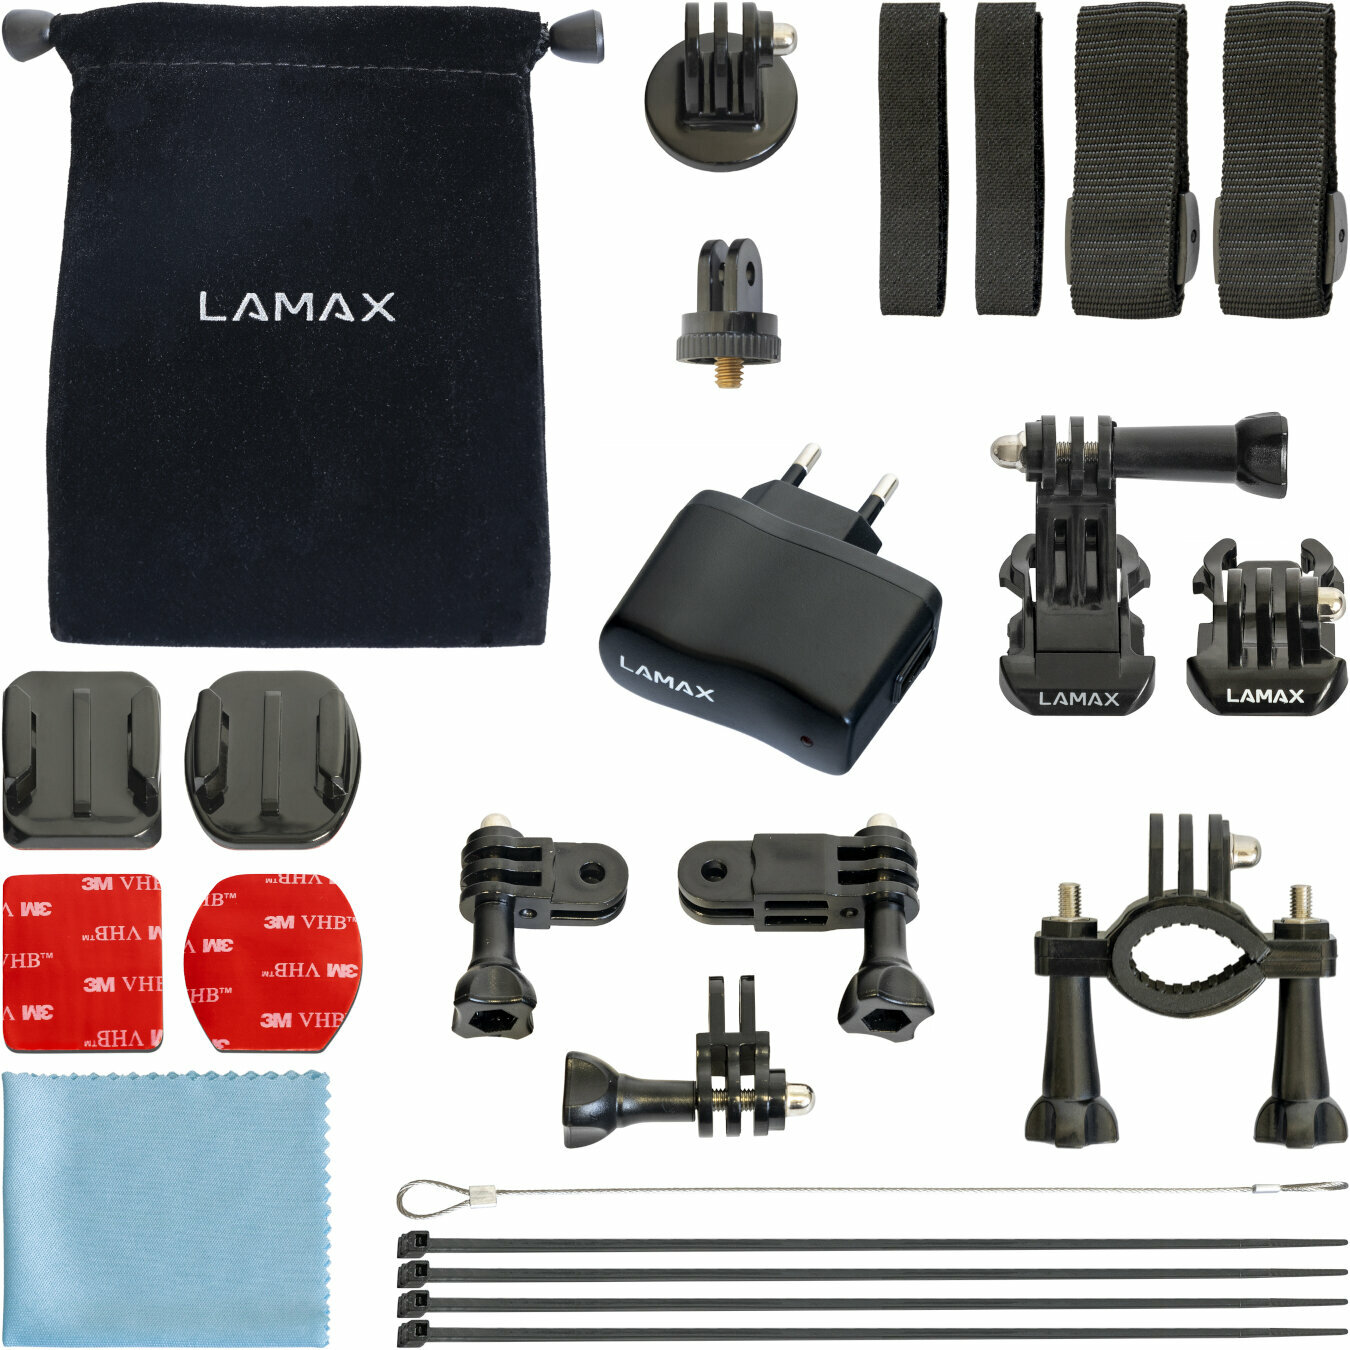 Stand, grips for action cameras LAMAX L Accessories